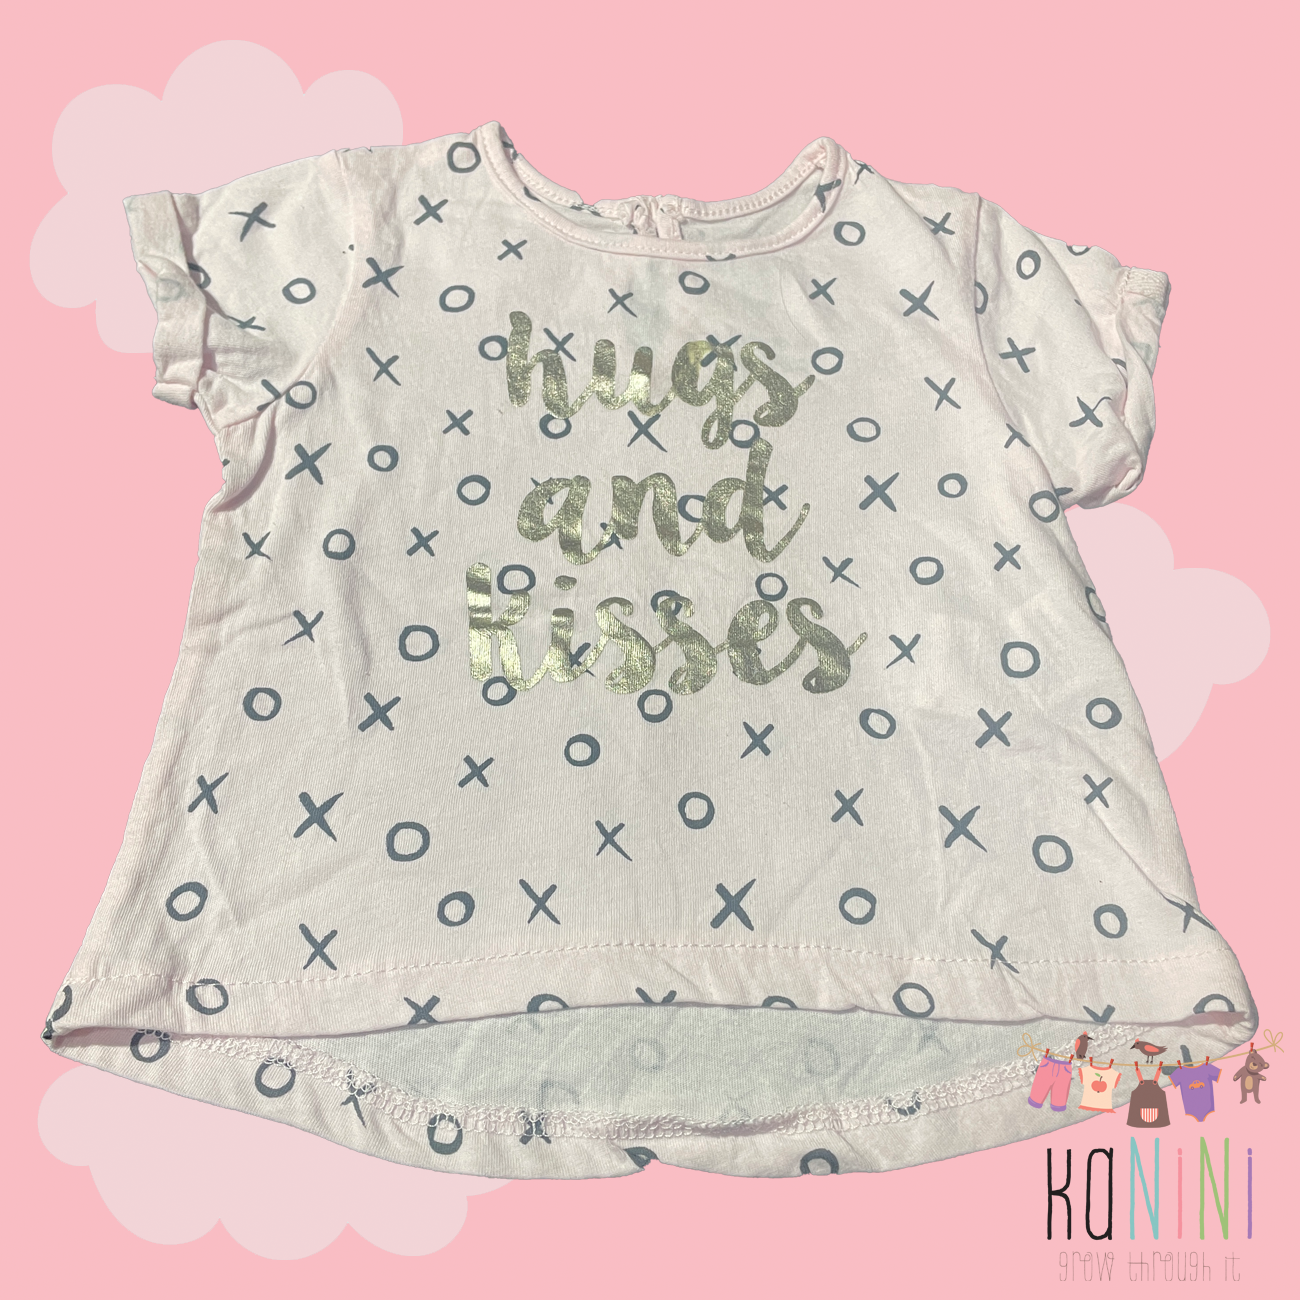 Featured image for “Cotton On 3 - 6 Months Girls Hugs & Kisses T-Shirt”